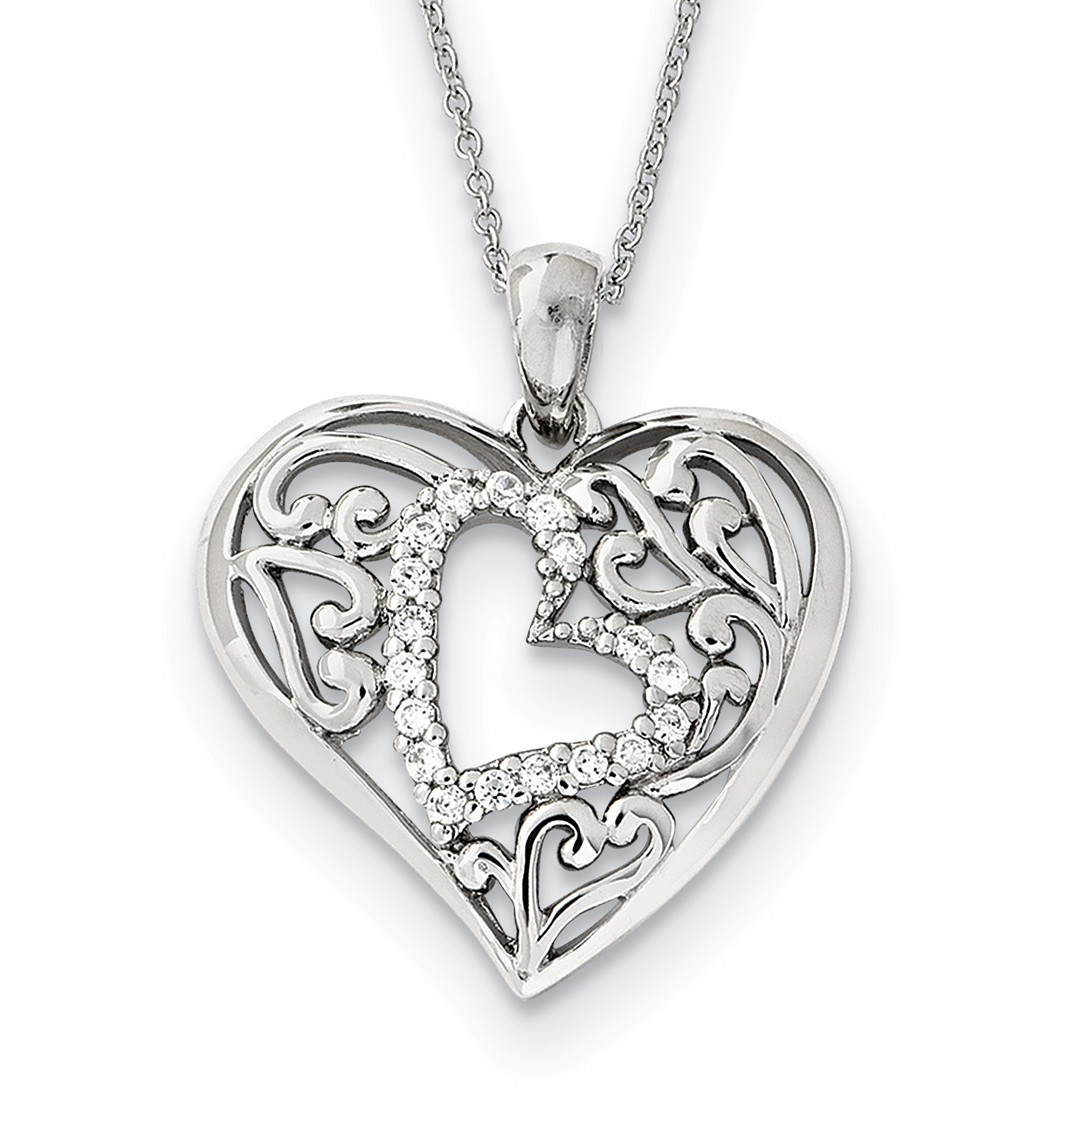   'Forever In My Heart' CZ Pendant Necklace, Rhodium-Plated Sterling Silver, 18